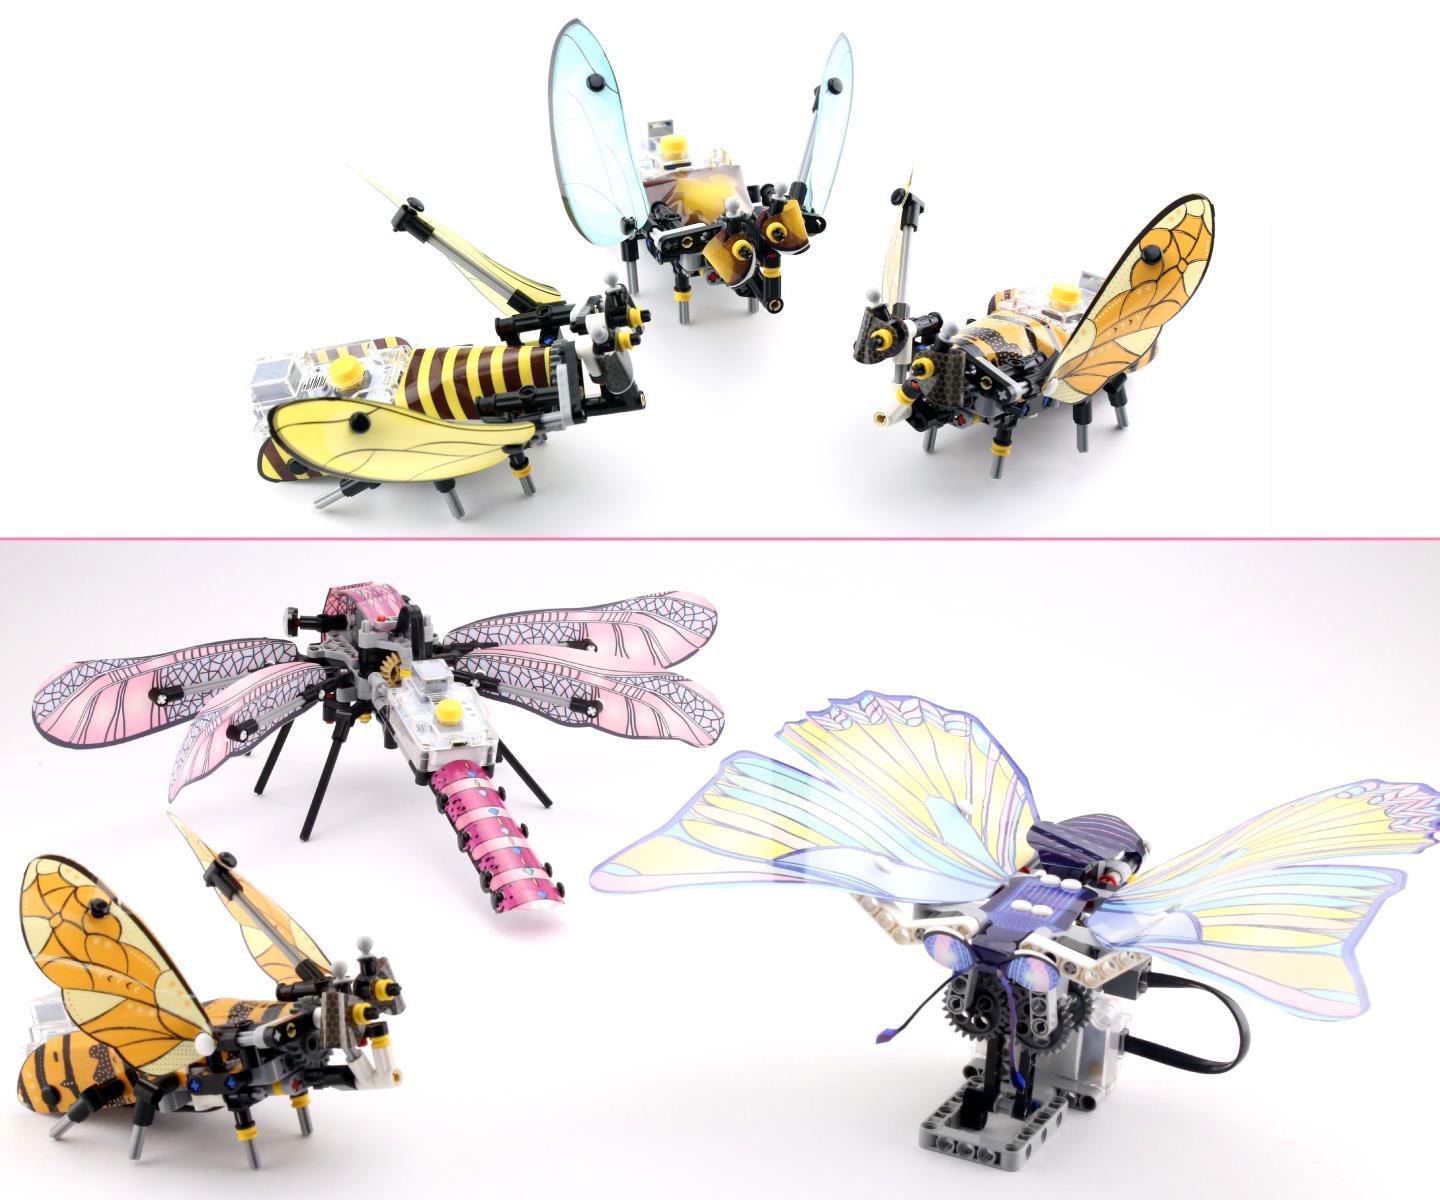 Cherry Tart: the Interactive & LEGO-compatible Crafting Nature-Inspired Robot Kit for Kids & Adults to Innovate